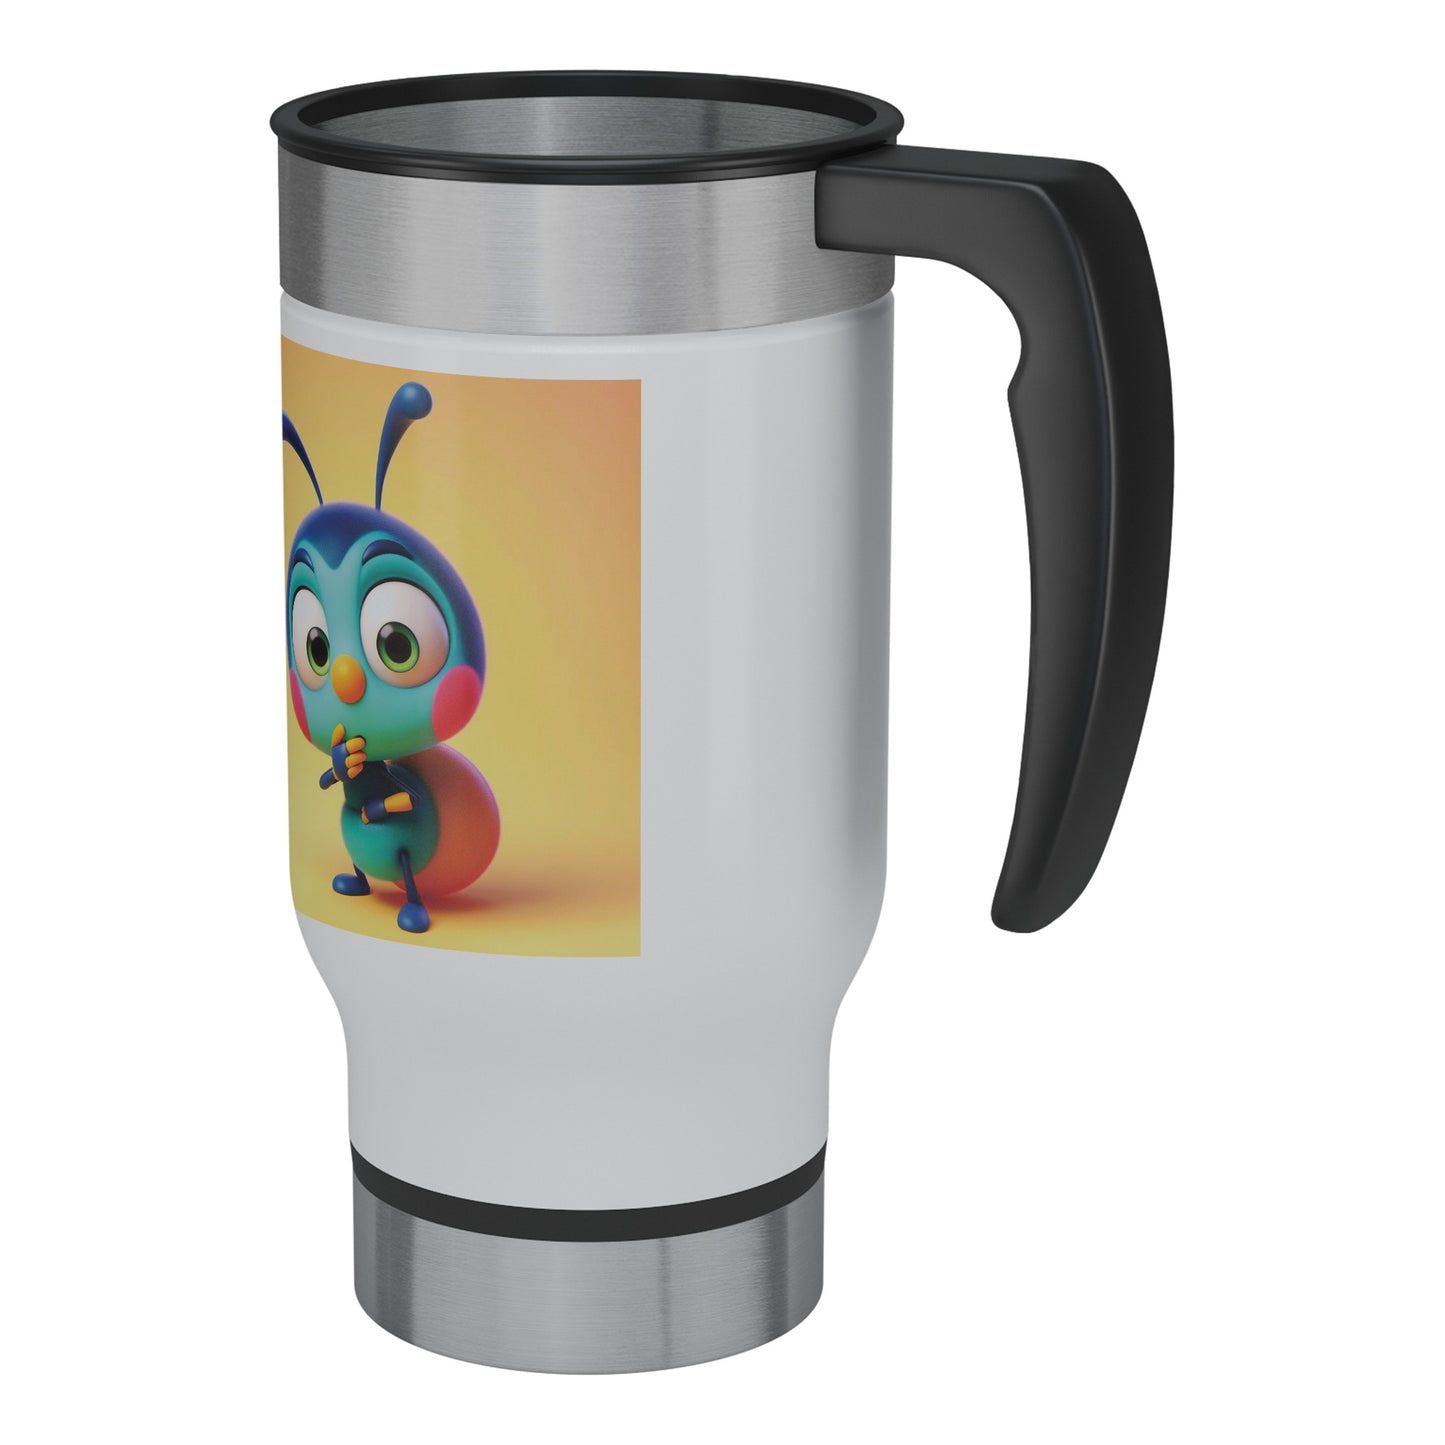 Cute & Adorable Insects - 14oz Travel Mug - Ants #2